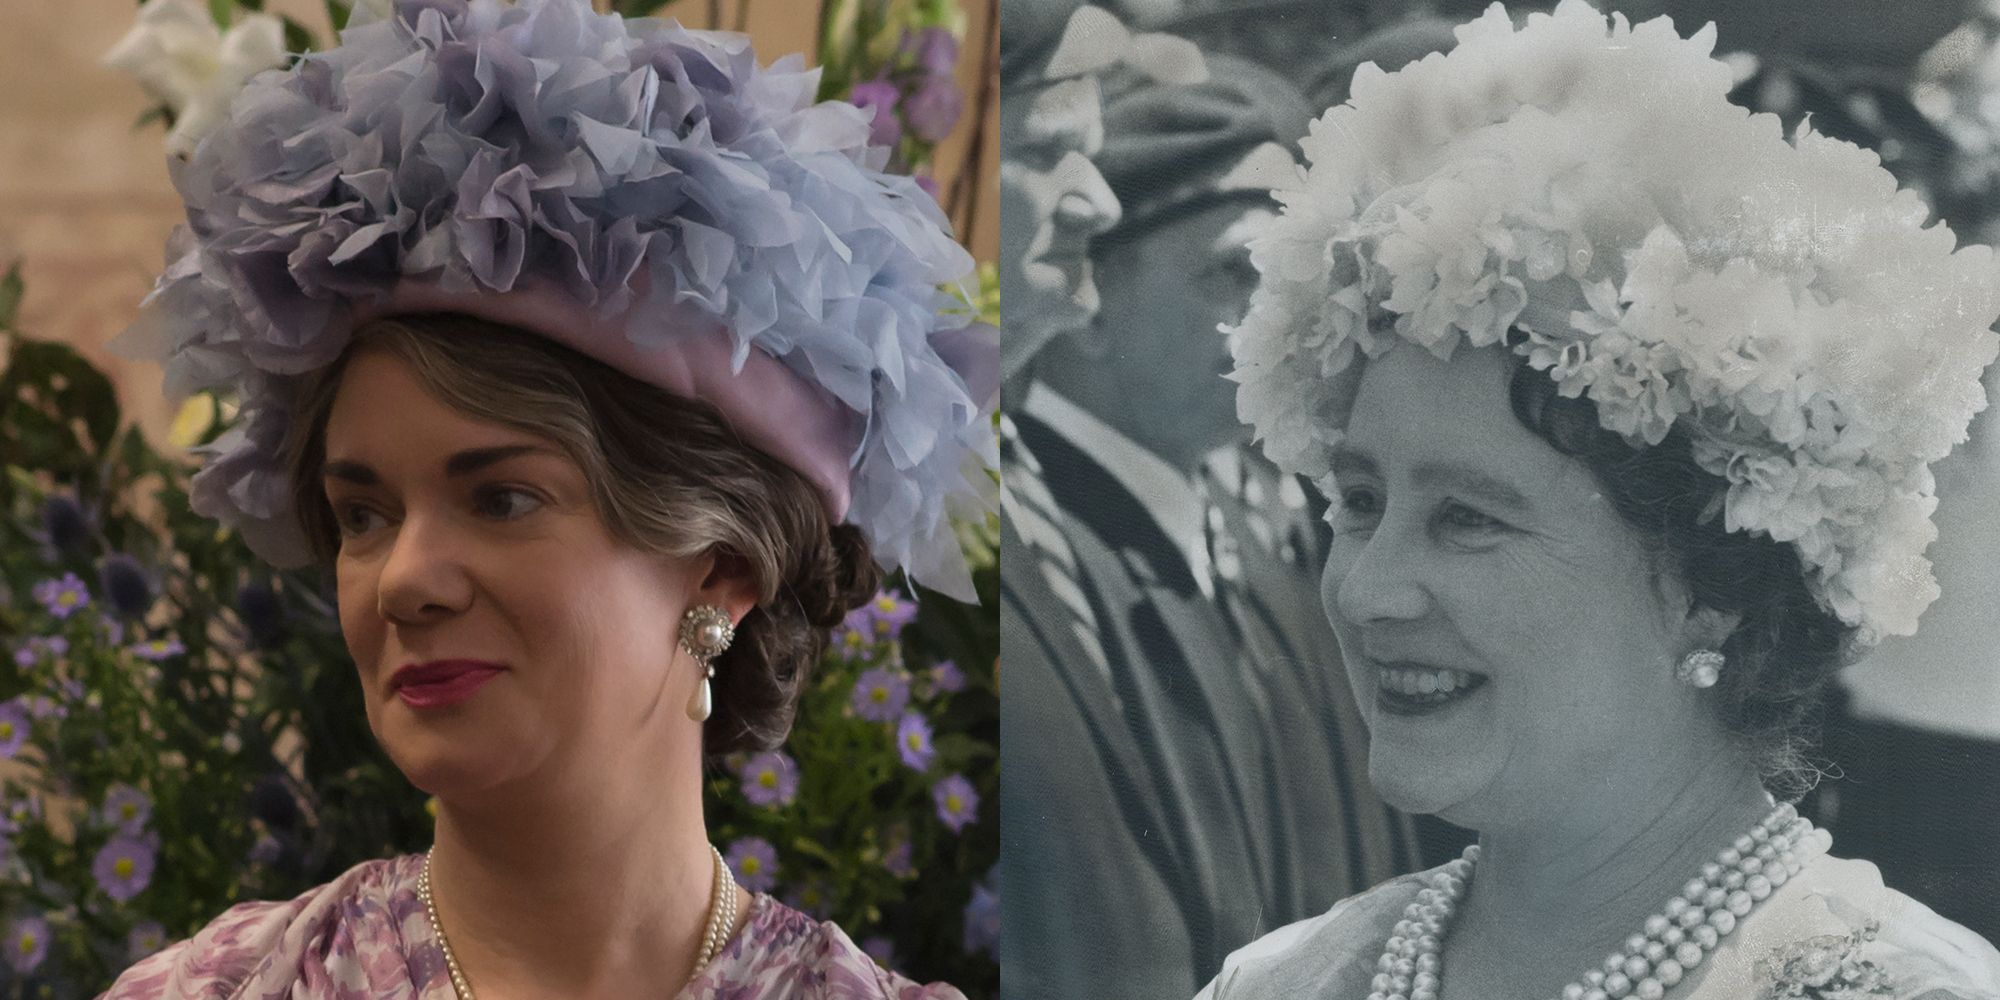 Cast of 'the Crown' Vs. Real-Life Royal Family and Politicians